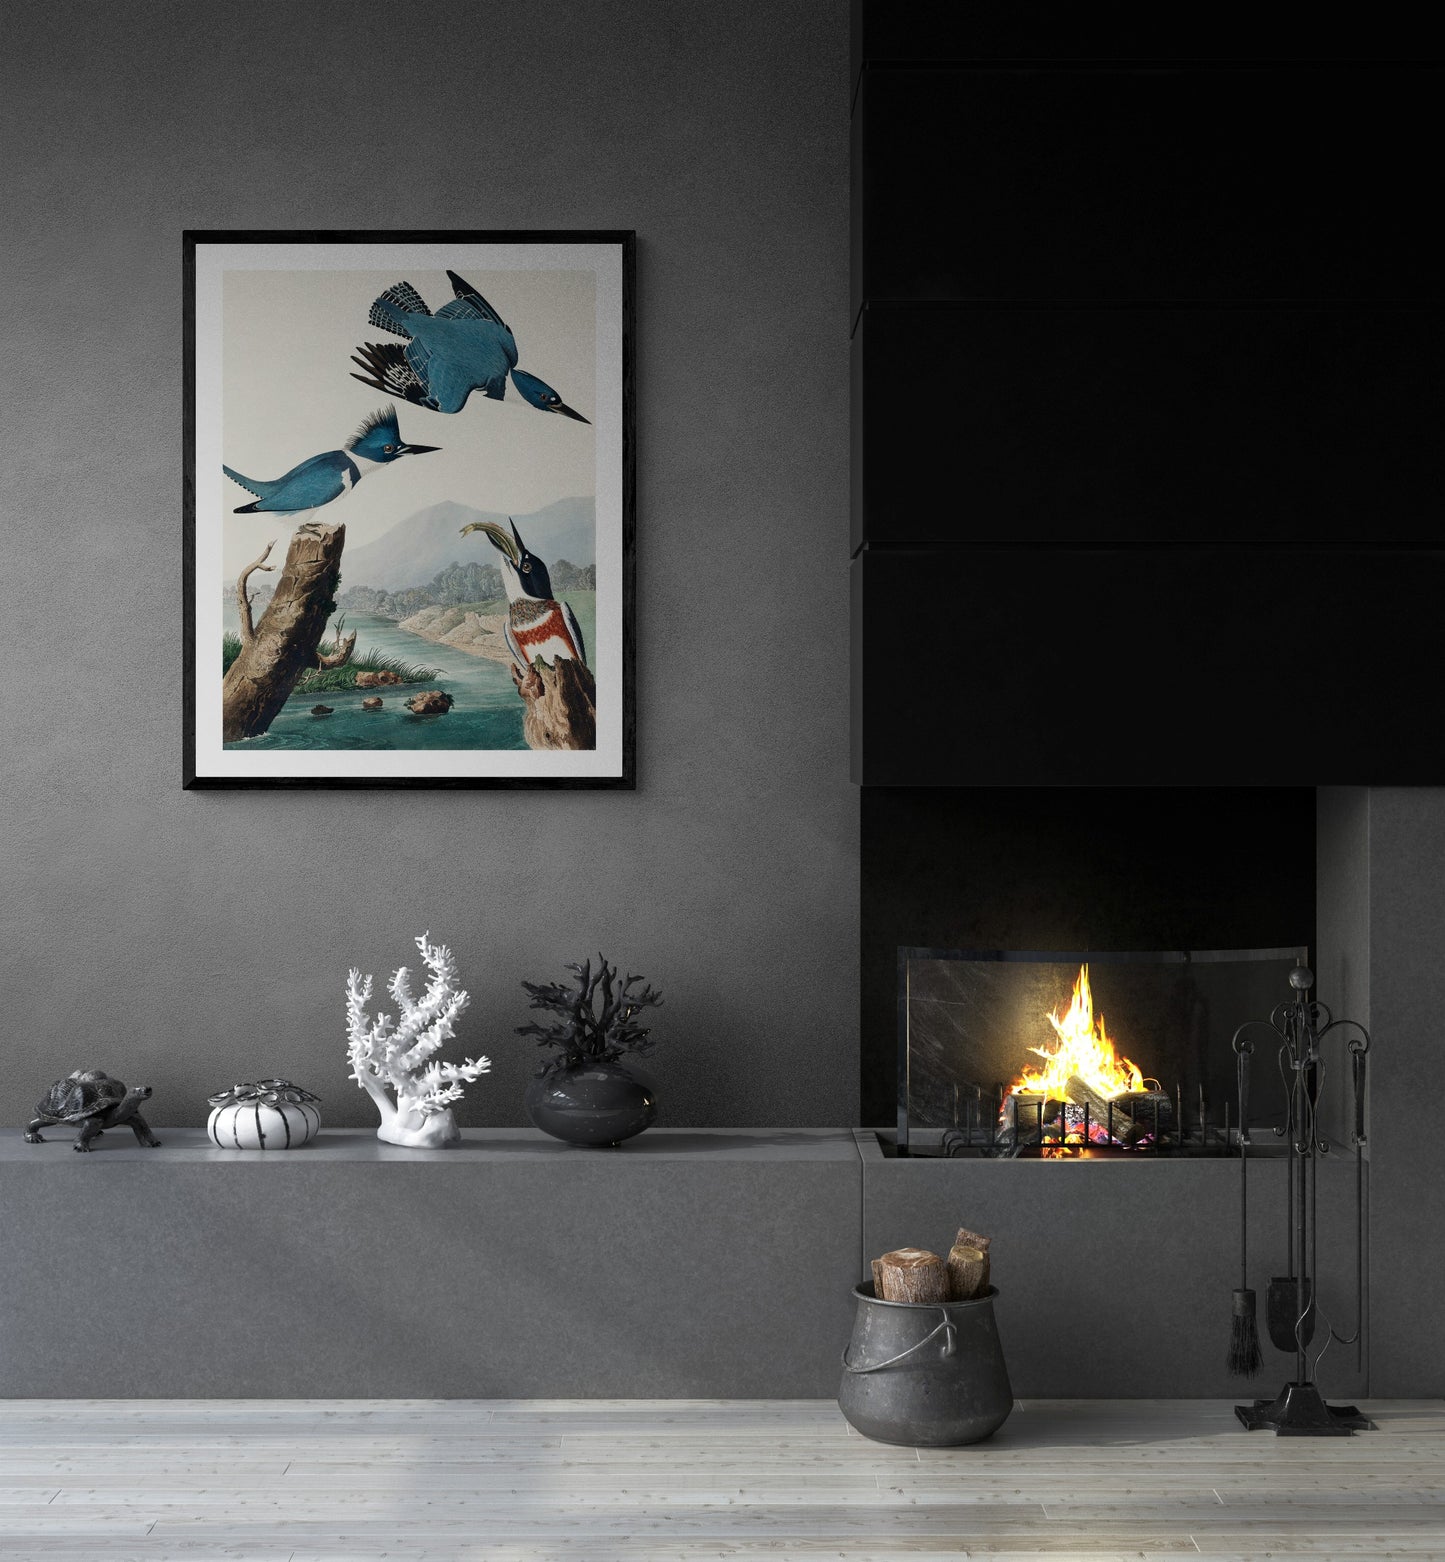 Vintage naturalistic bird illustrations: Belted Kingfisher. Prints on art paper, canvas, and framed canvas. Free shipping in the USA. SKUJJA016